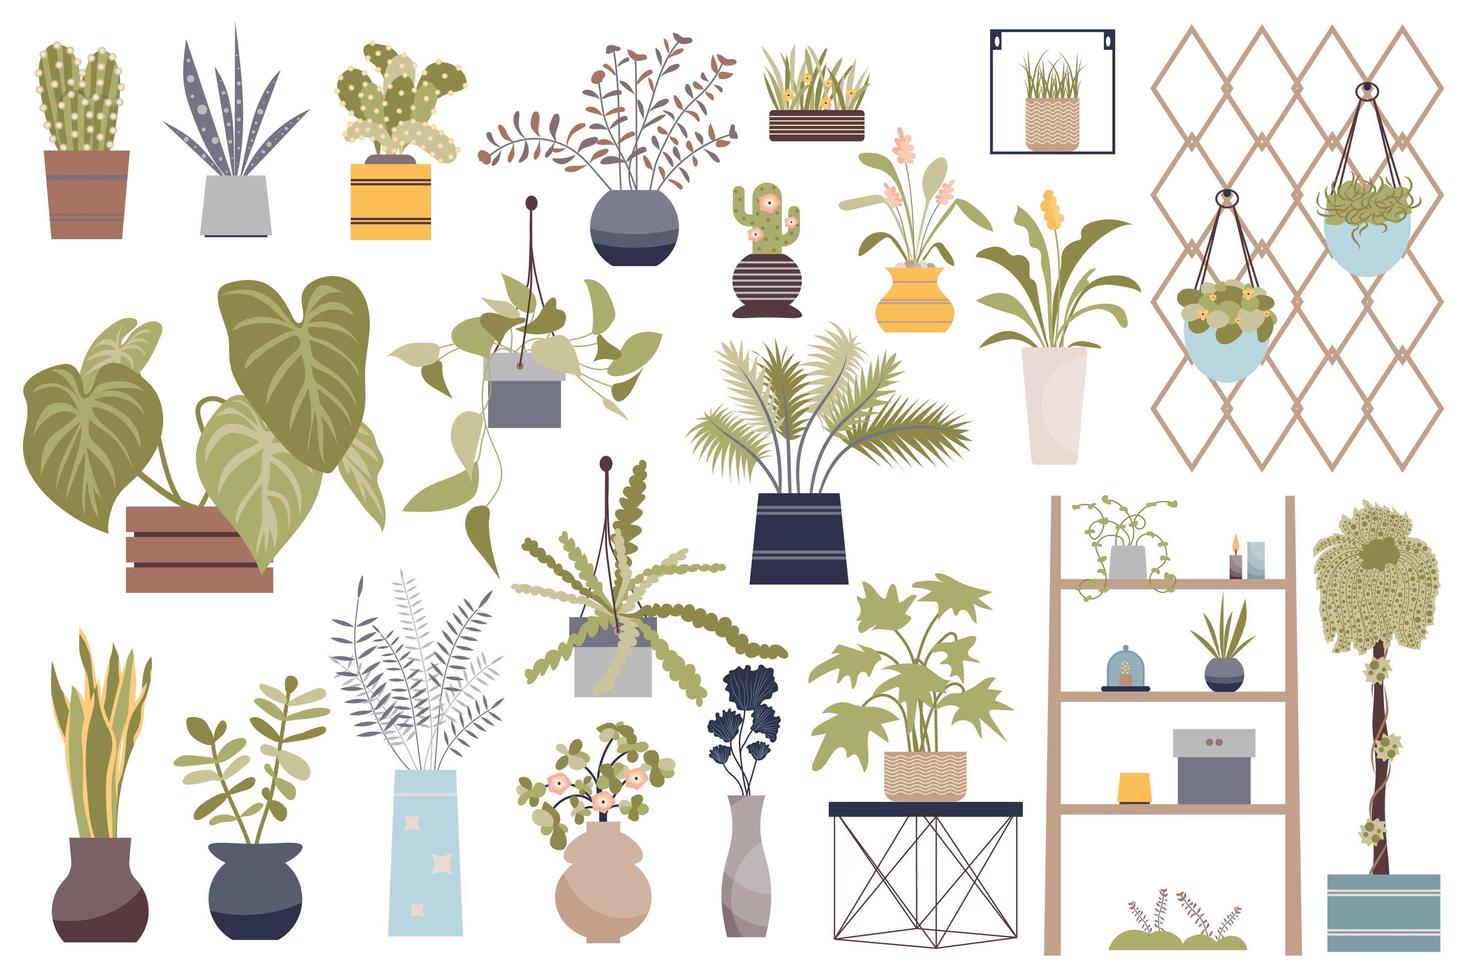 House plants isolated elements set. Bundle of domestic potted houseplant and blooming flowers, shelves with pots, hanging plants and other. Creator kit for vector illustration in flat cartoon design